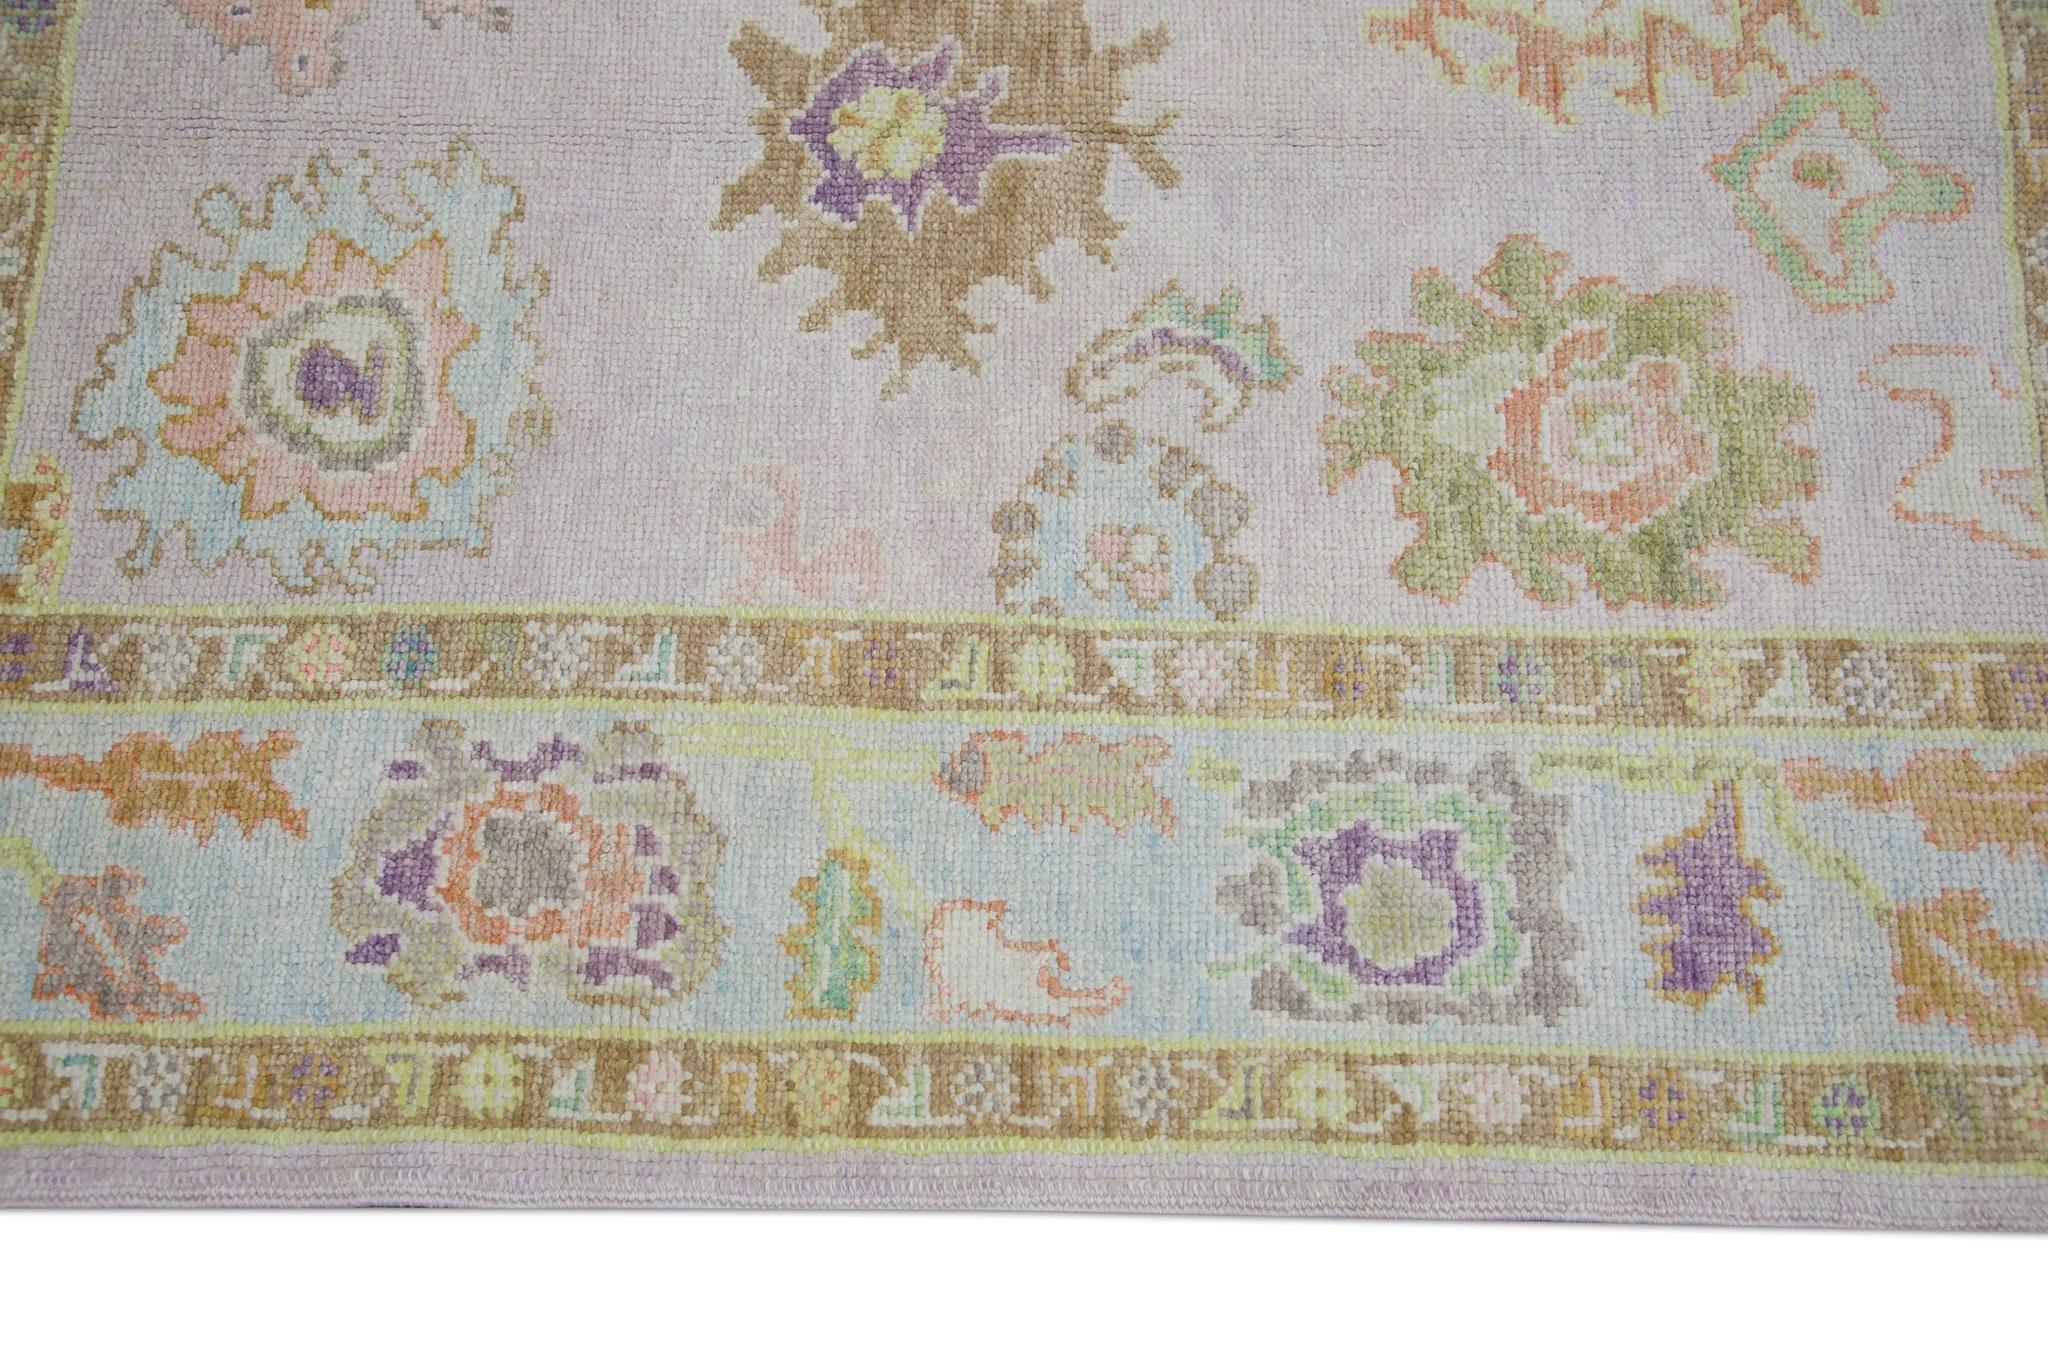 Contemporary Handwoven Wool Turkish Oushak Rug Lilac Field Multicolor Floral Design 4'2 x 5'7 For Sale